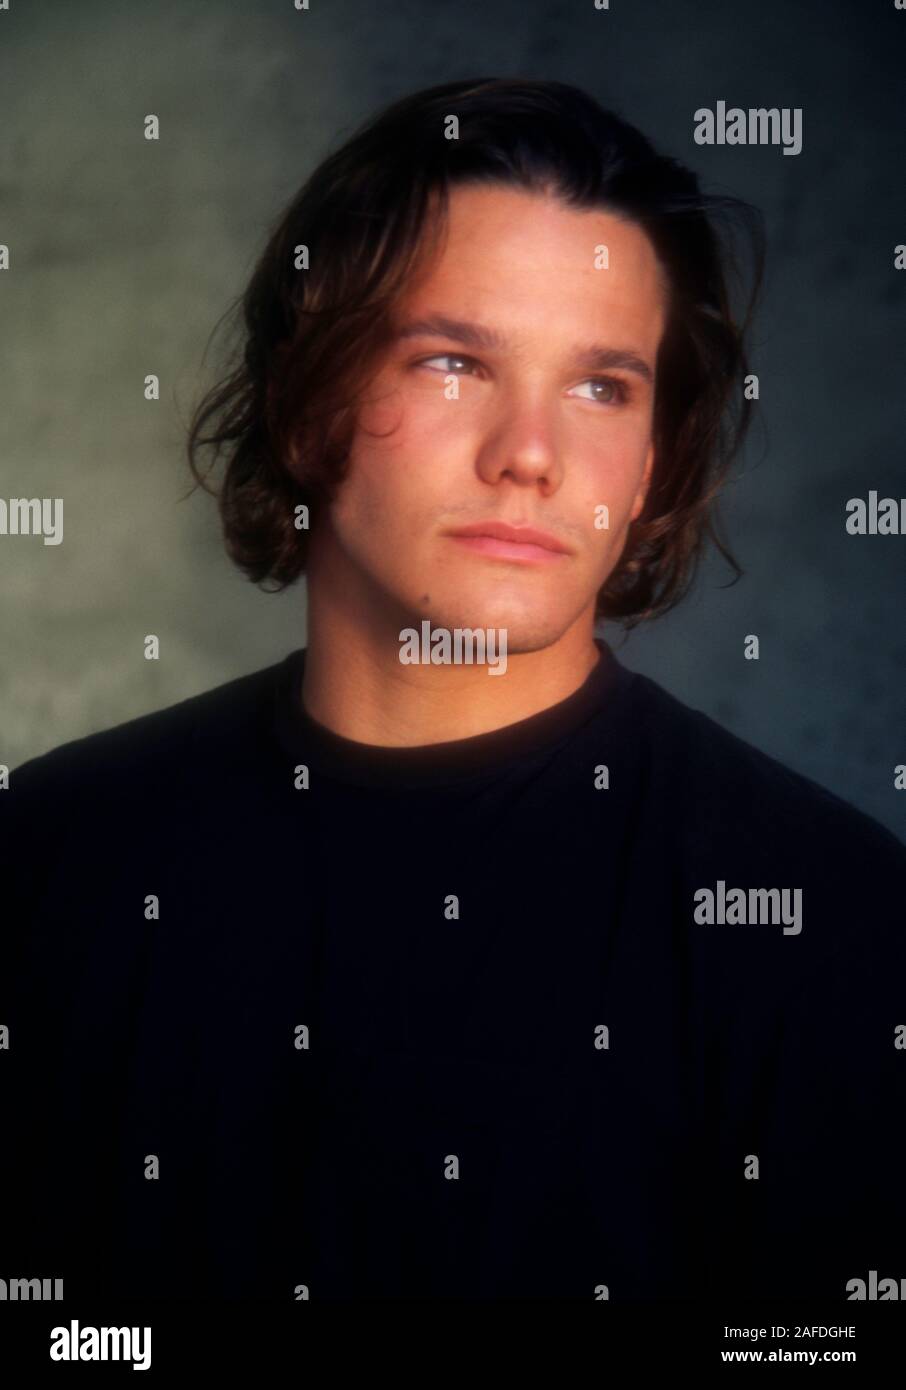 Los Angeles, California, USA 2nd April 1995 (Exclusive) Actor Dylan Bruno poses at a photo shoot on April 2, 1995 in Los Angeles, California, USA. Photo by Barry King/Alamy Stock Photo Stock Photo